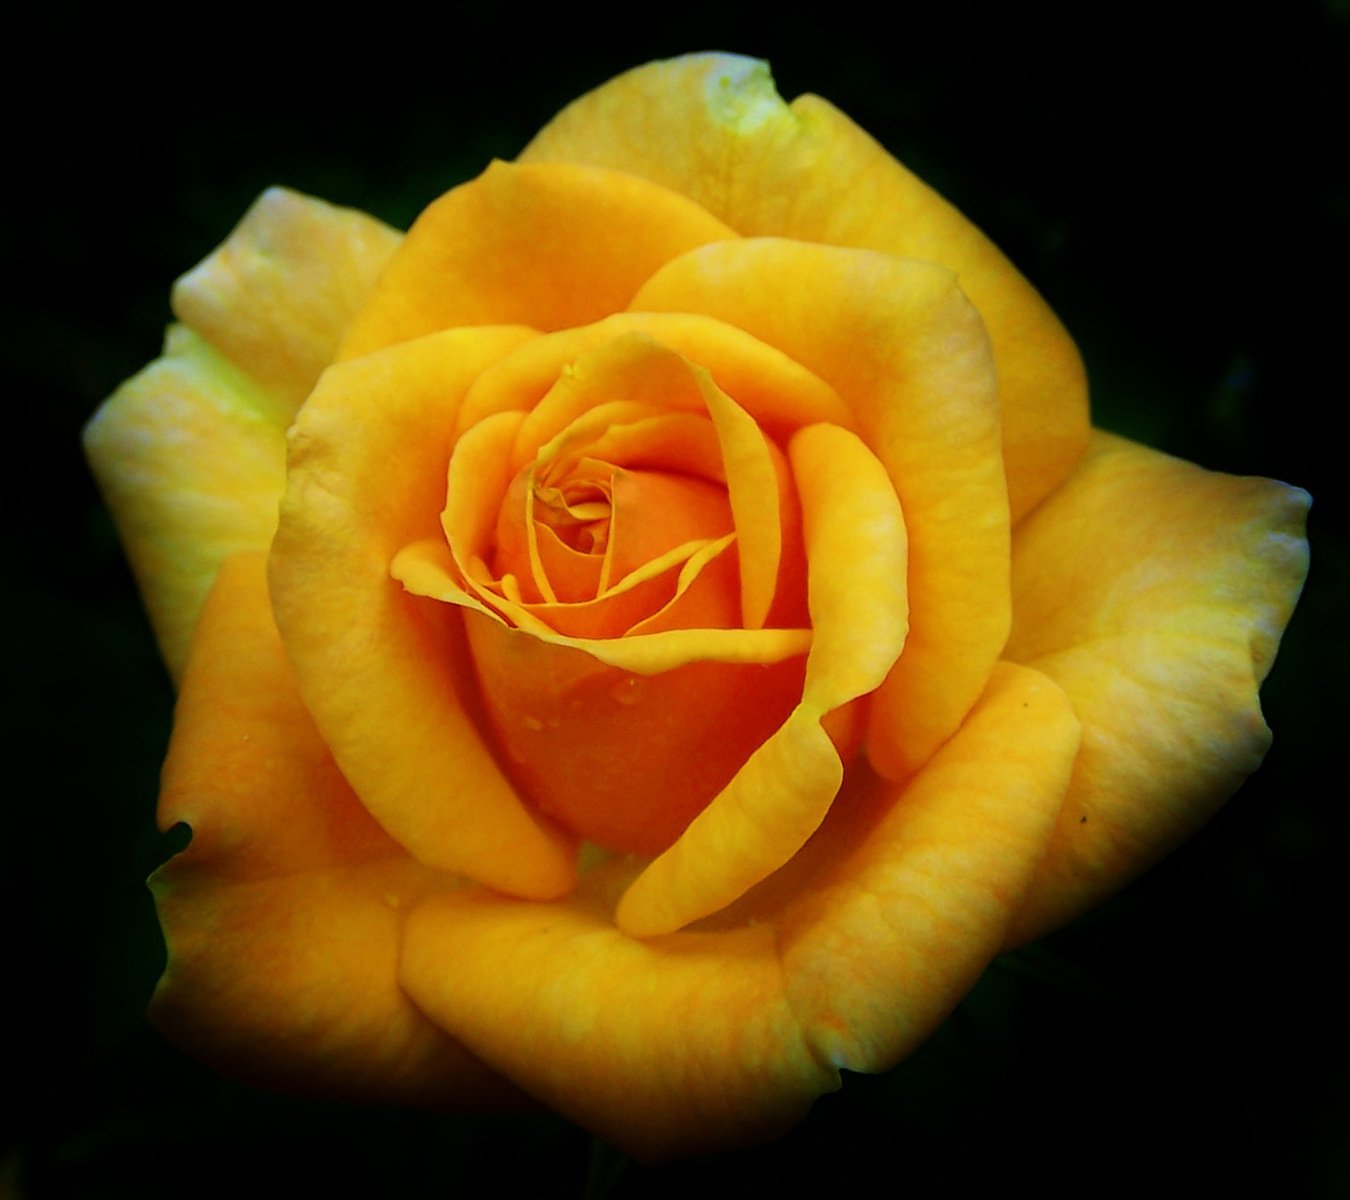 a yellow rose that is a budding and open